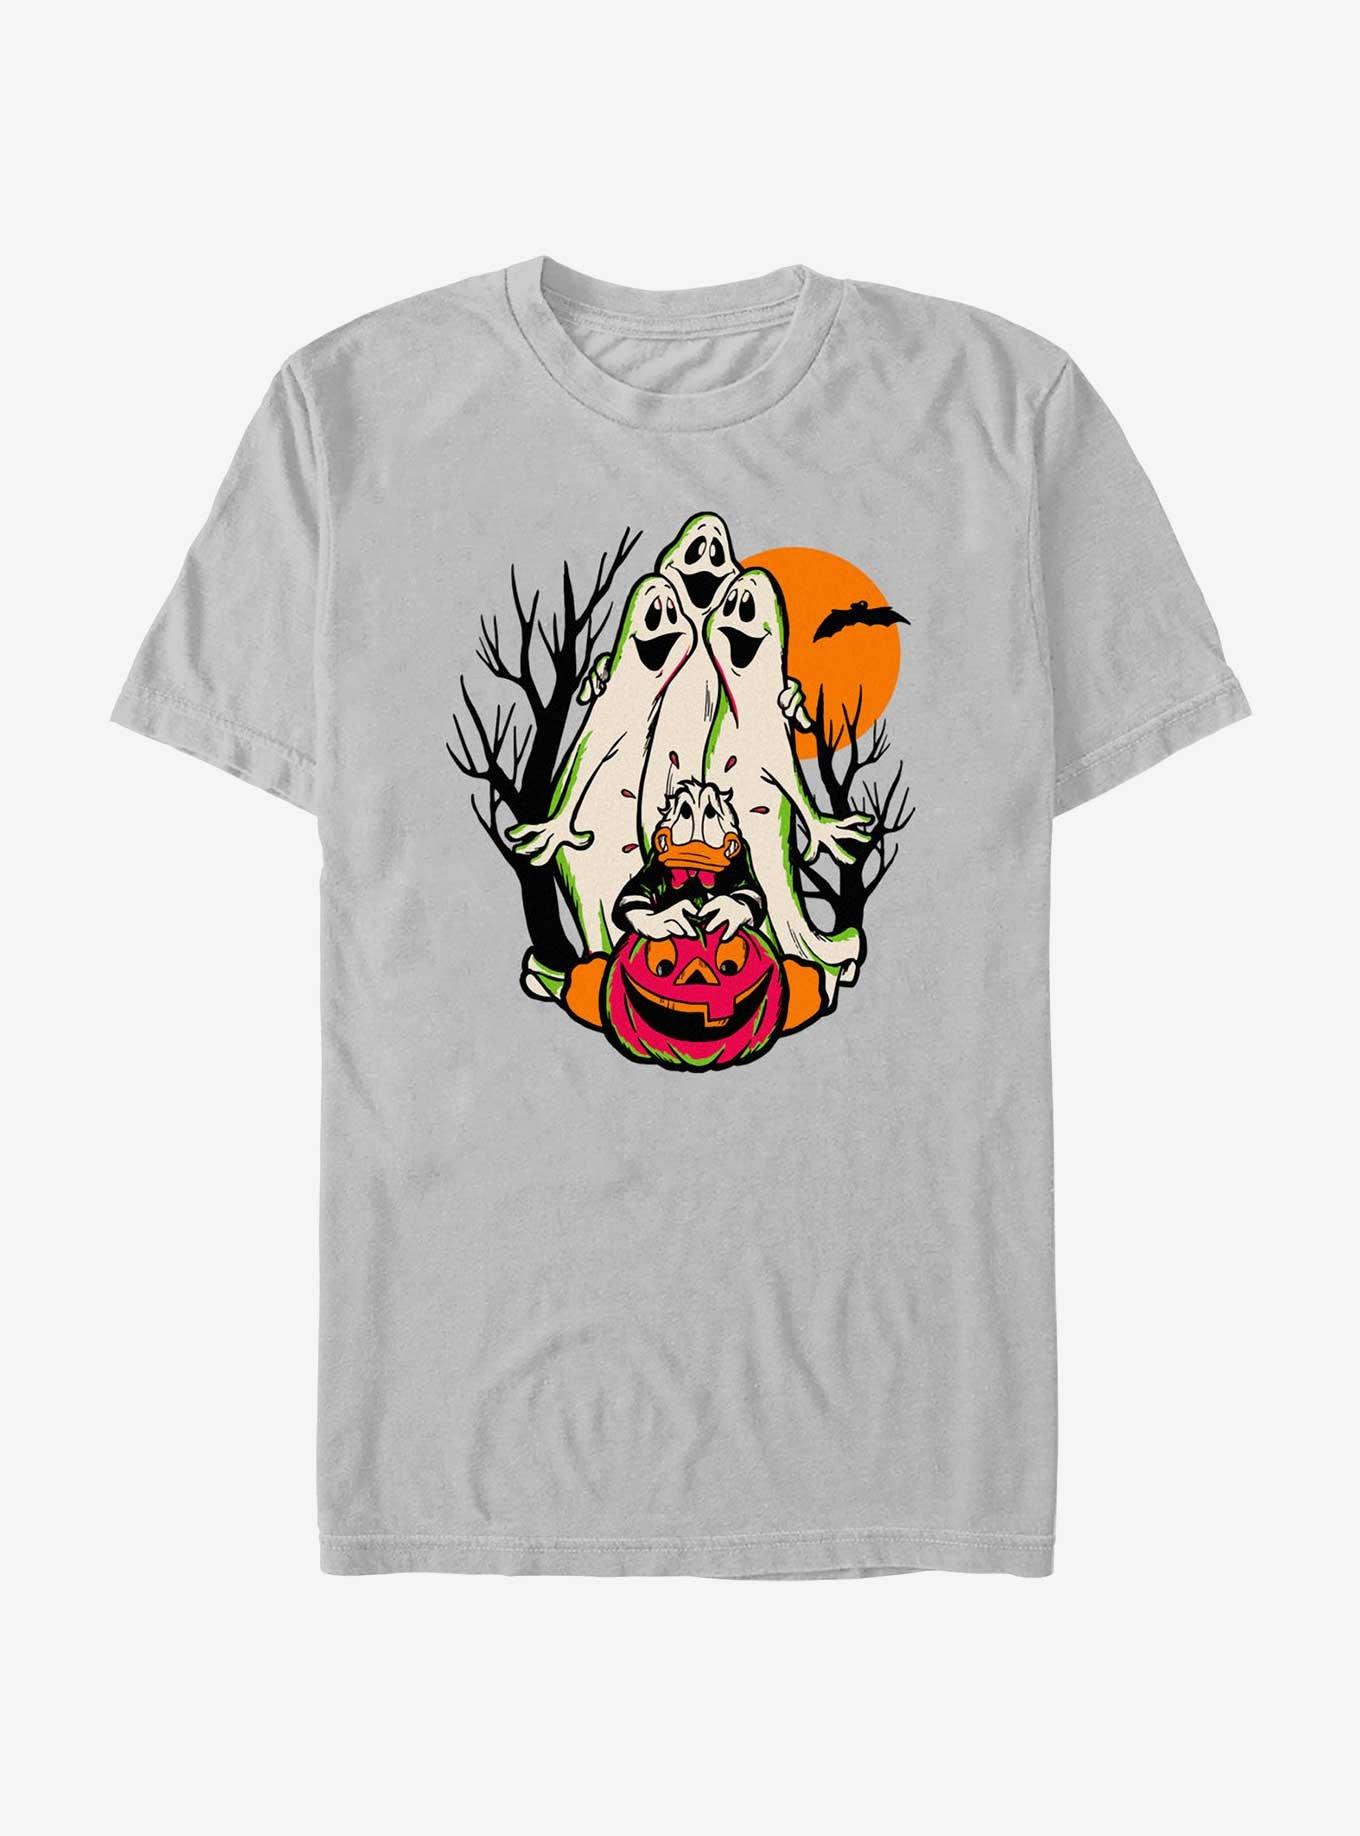 Disney100 Halloween Spooky Ghosts Scared Donald T-Shirt, SILVER, hi-res